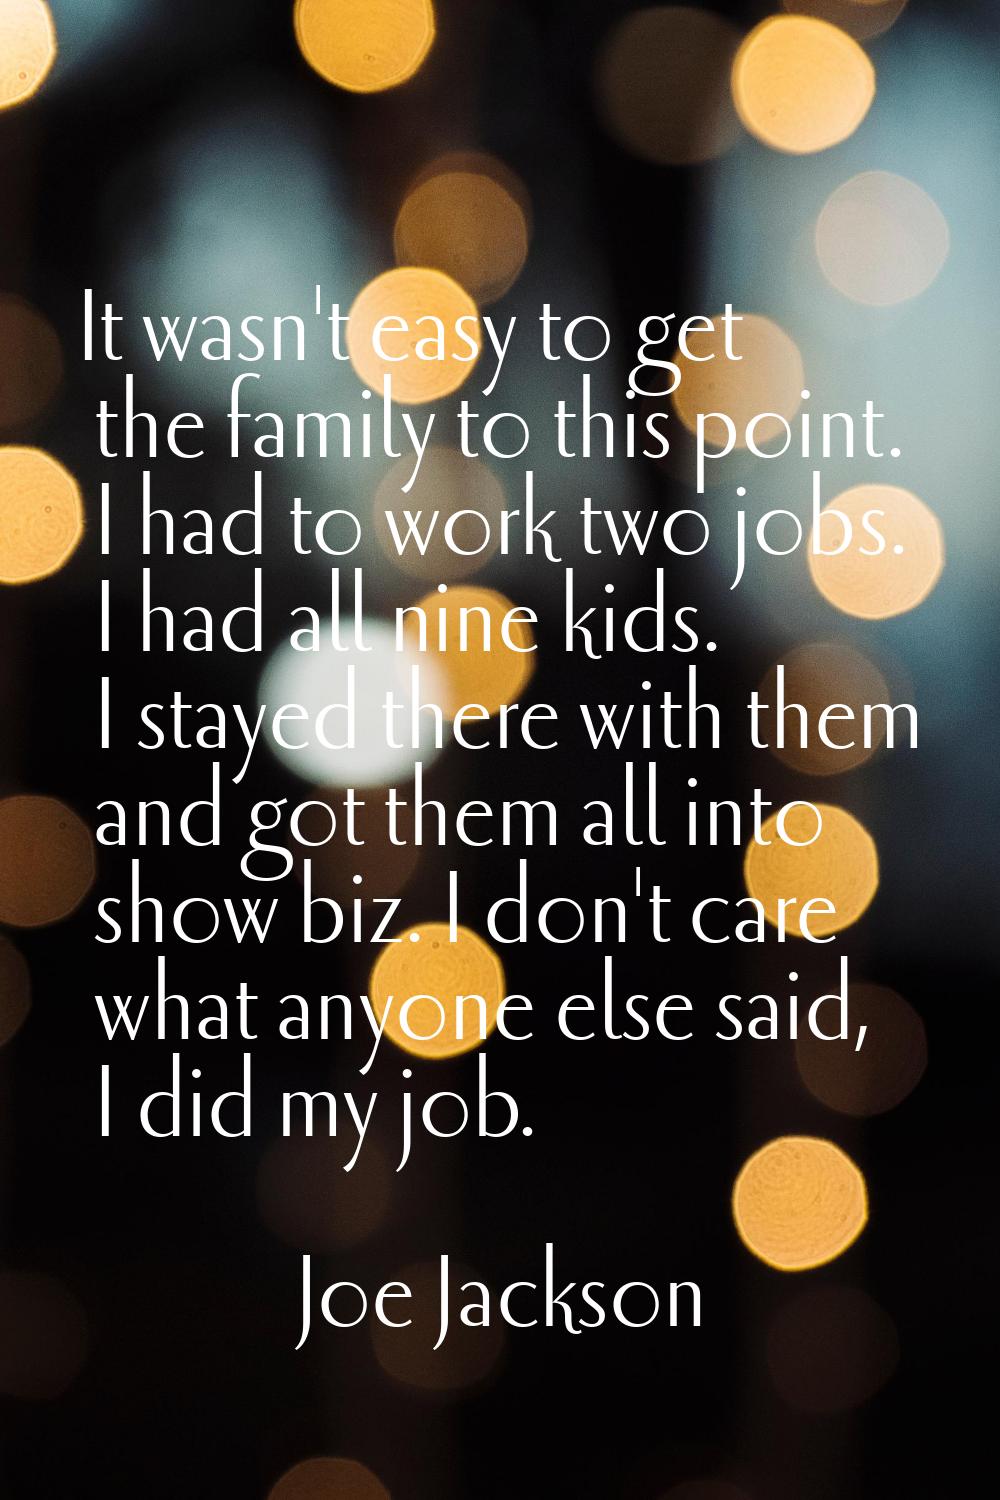 It wasn't easy to get the family to this point. I had to work two jobs. I had all nine kids. I stay